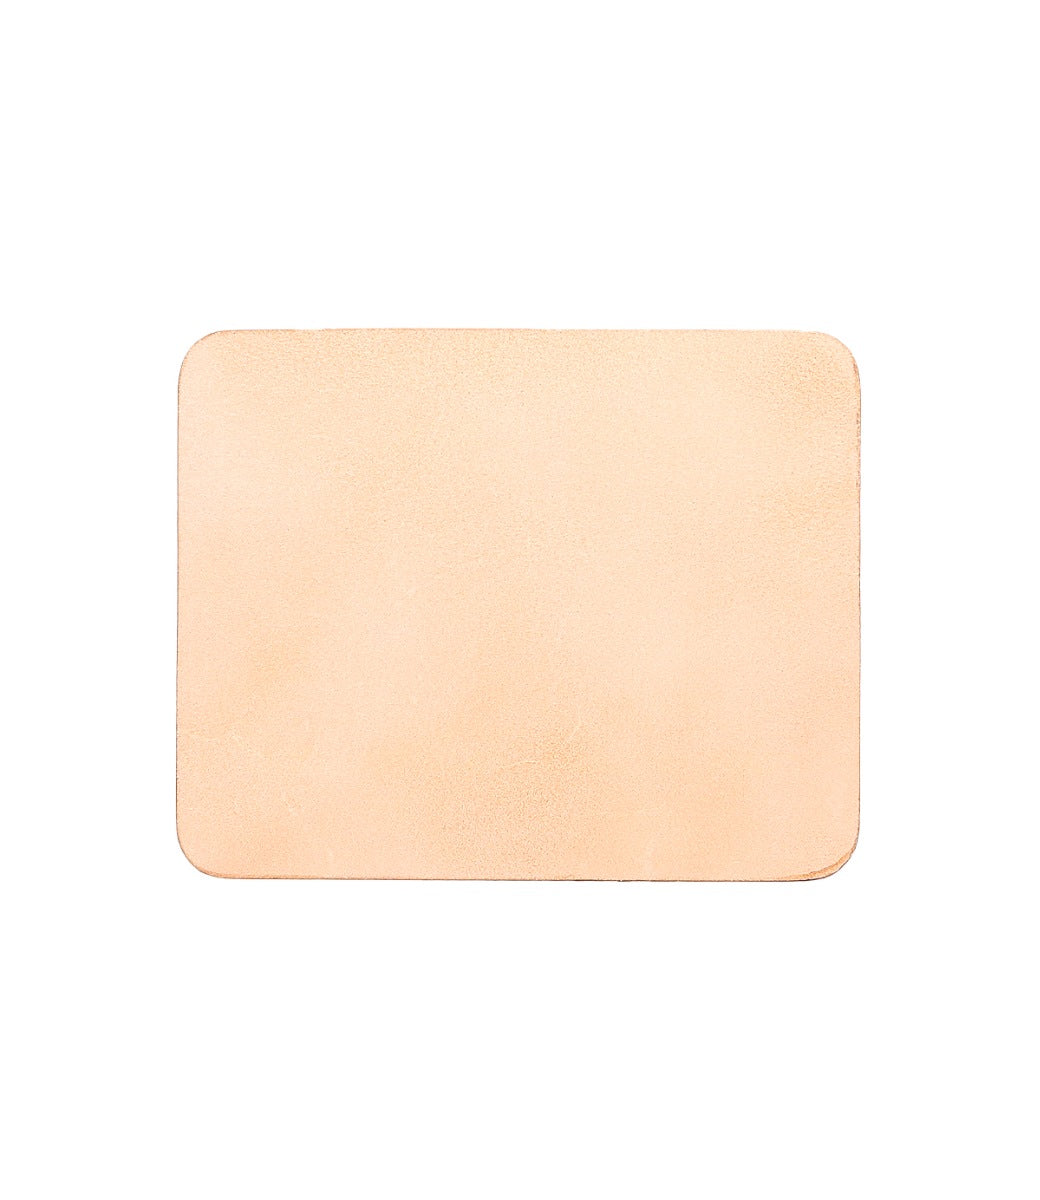 A Launcher Mouse Pad, rectangular, light tan-colored leather mouse pad with a suede underside and slightly rounded corners. Perfect for a curated workspace by Bed Stu.